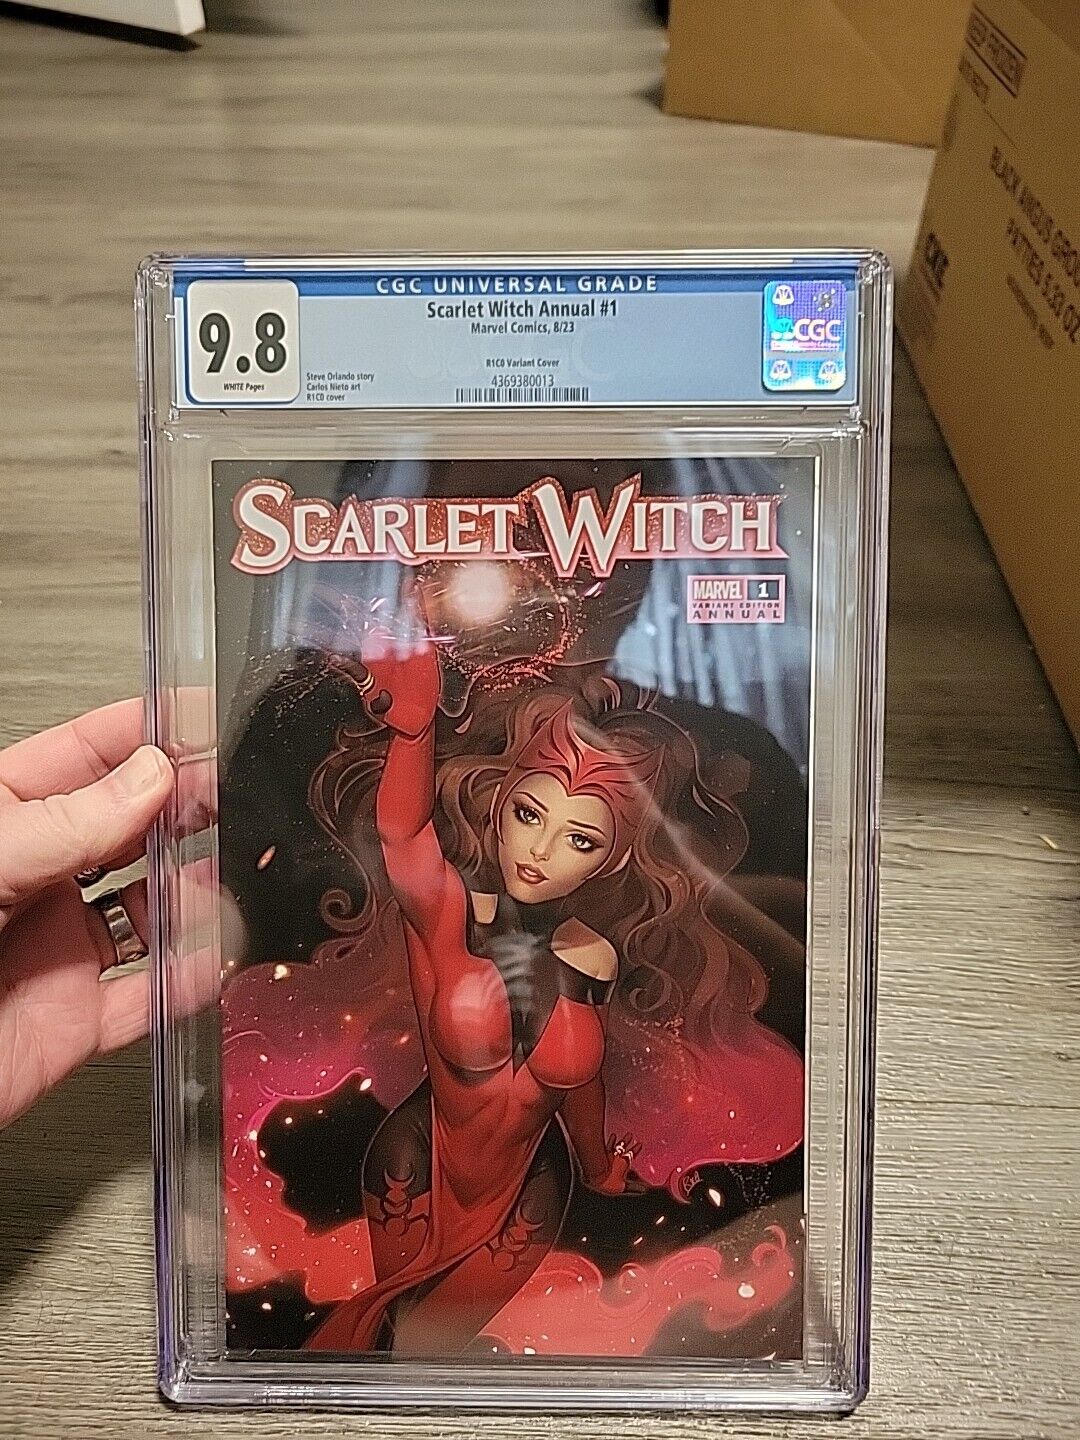 Scarlet Witch Annual #1 CGC 9.8 R1C0 Variant Cover 616 Comics Exclusive